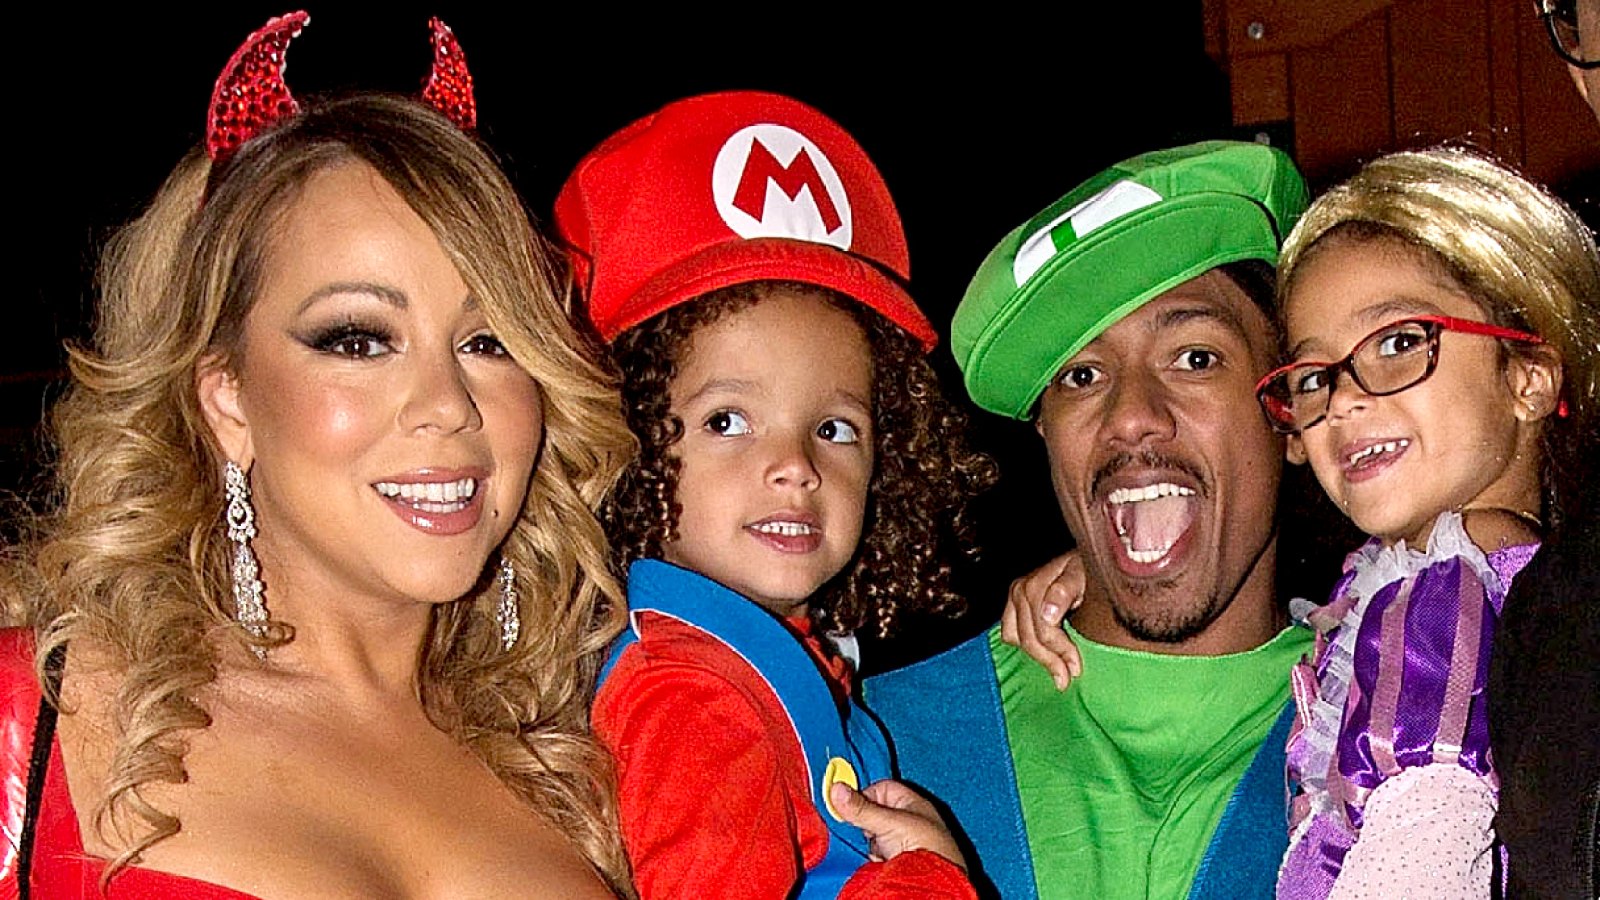 Mariah Carey, Moroccan Cannon, Nick Cannon, and Monroe Cannon attend Mariah Carey's Halloween Party on October 22, 2016 in Los Angeles, California.